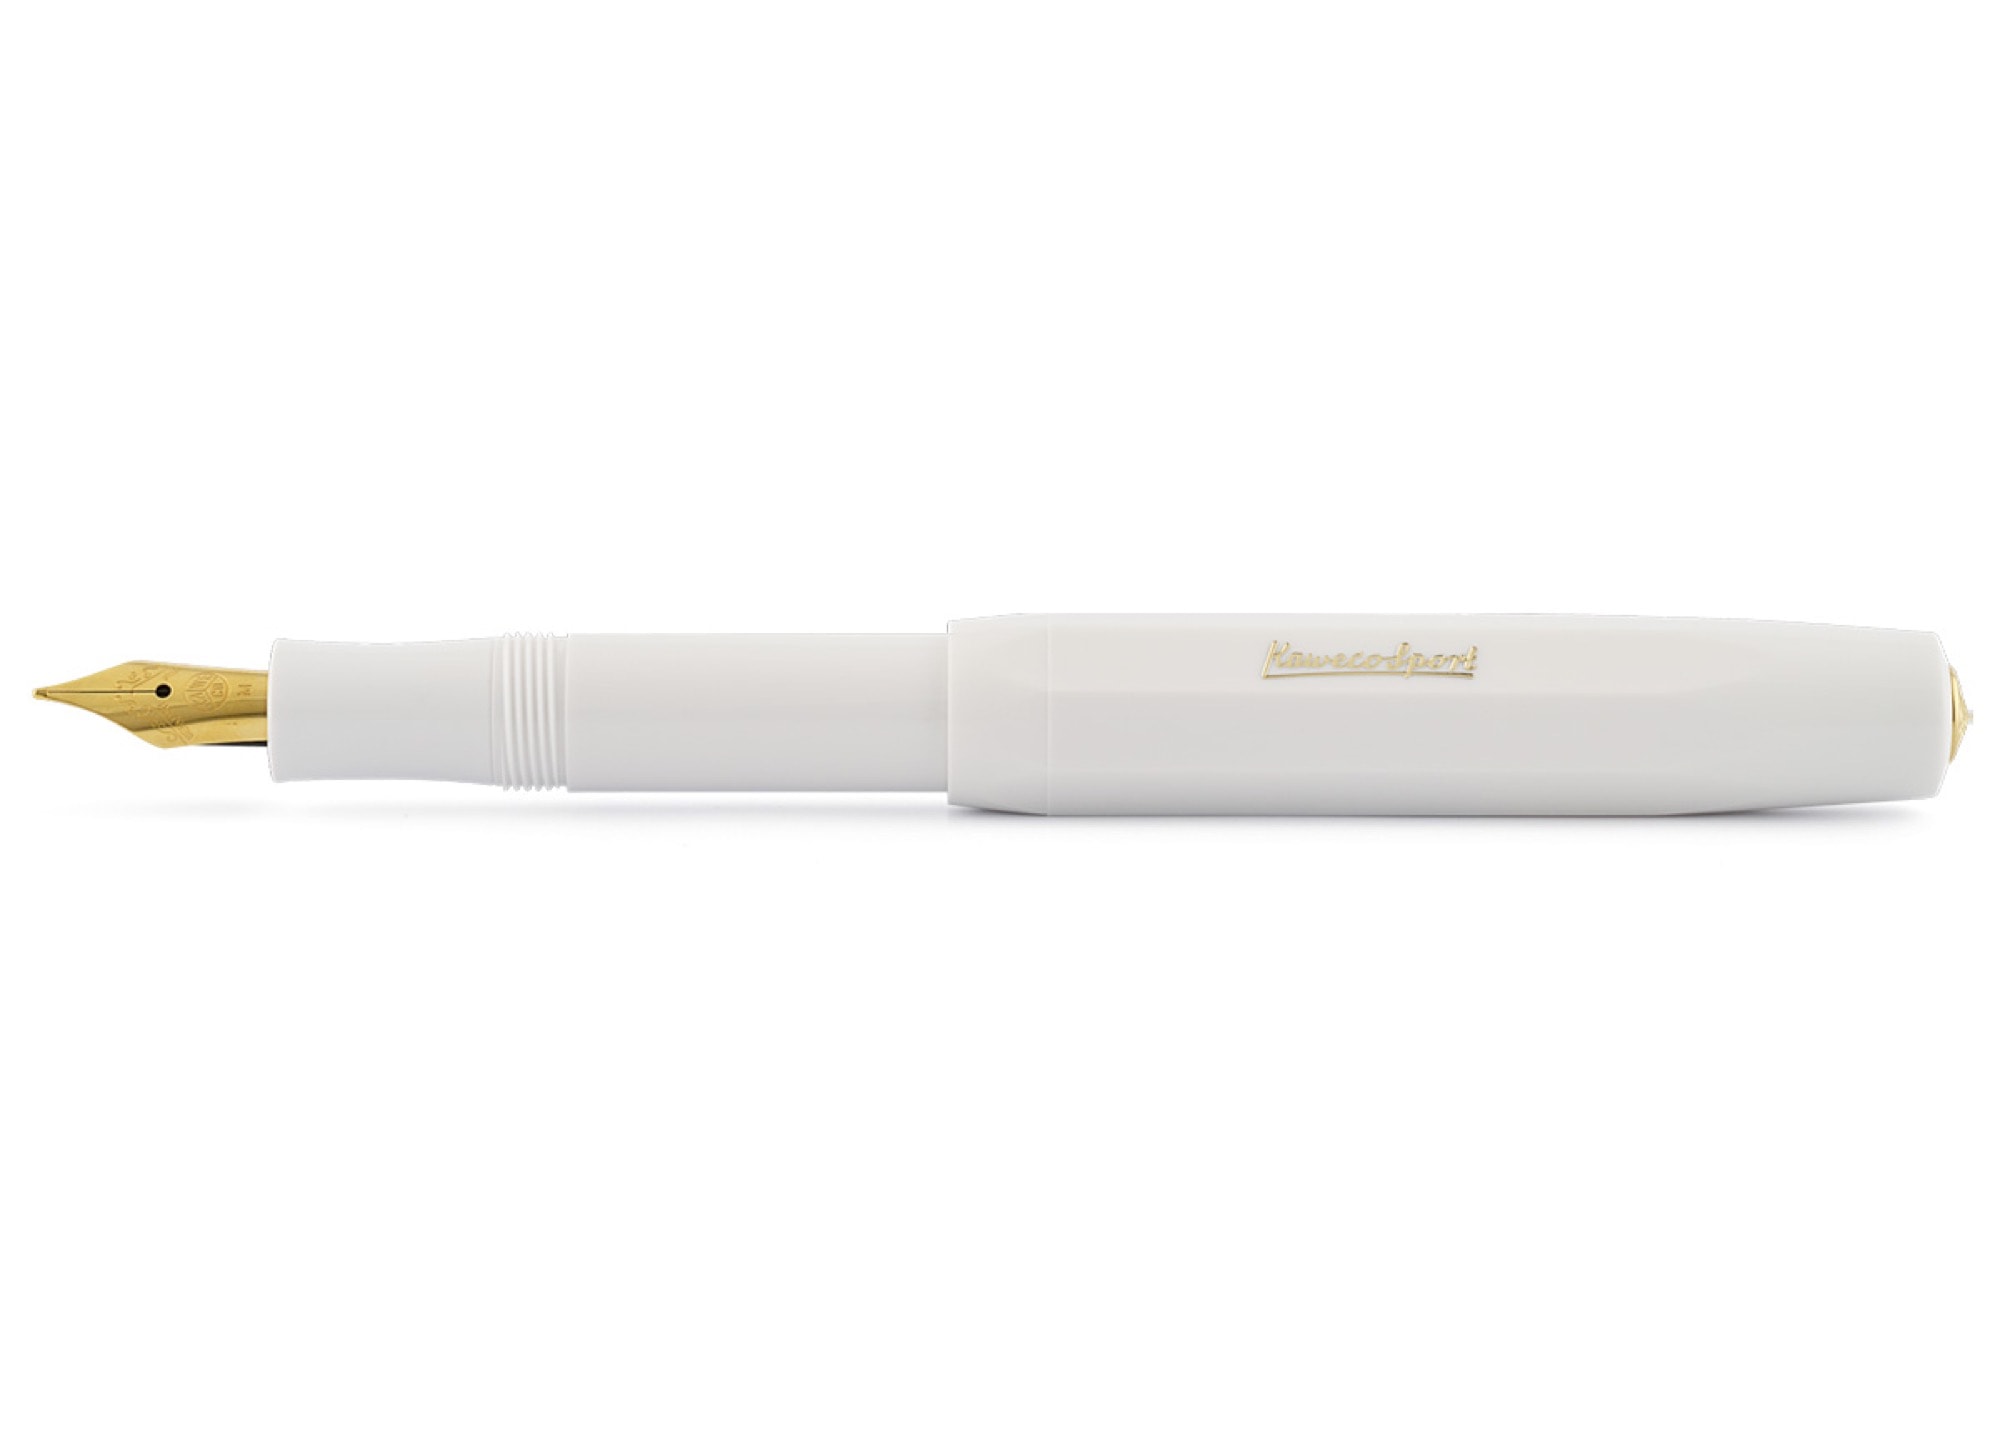 Jony Ive would approve of the white plastic Kaweco Sport.